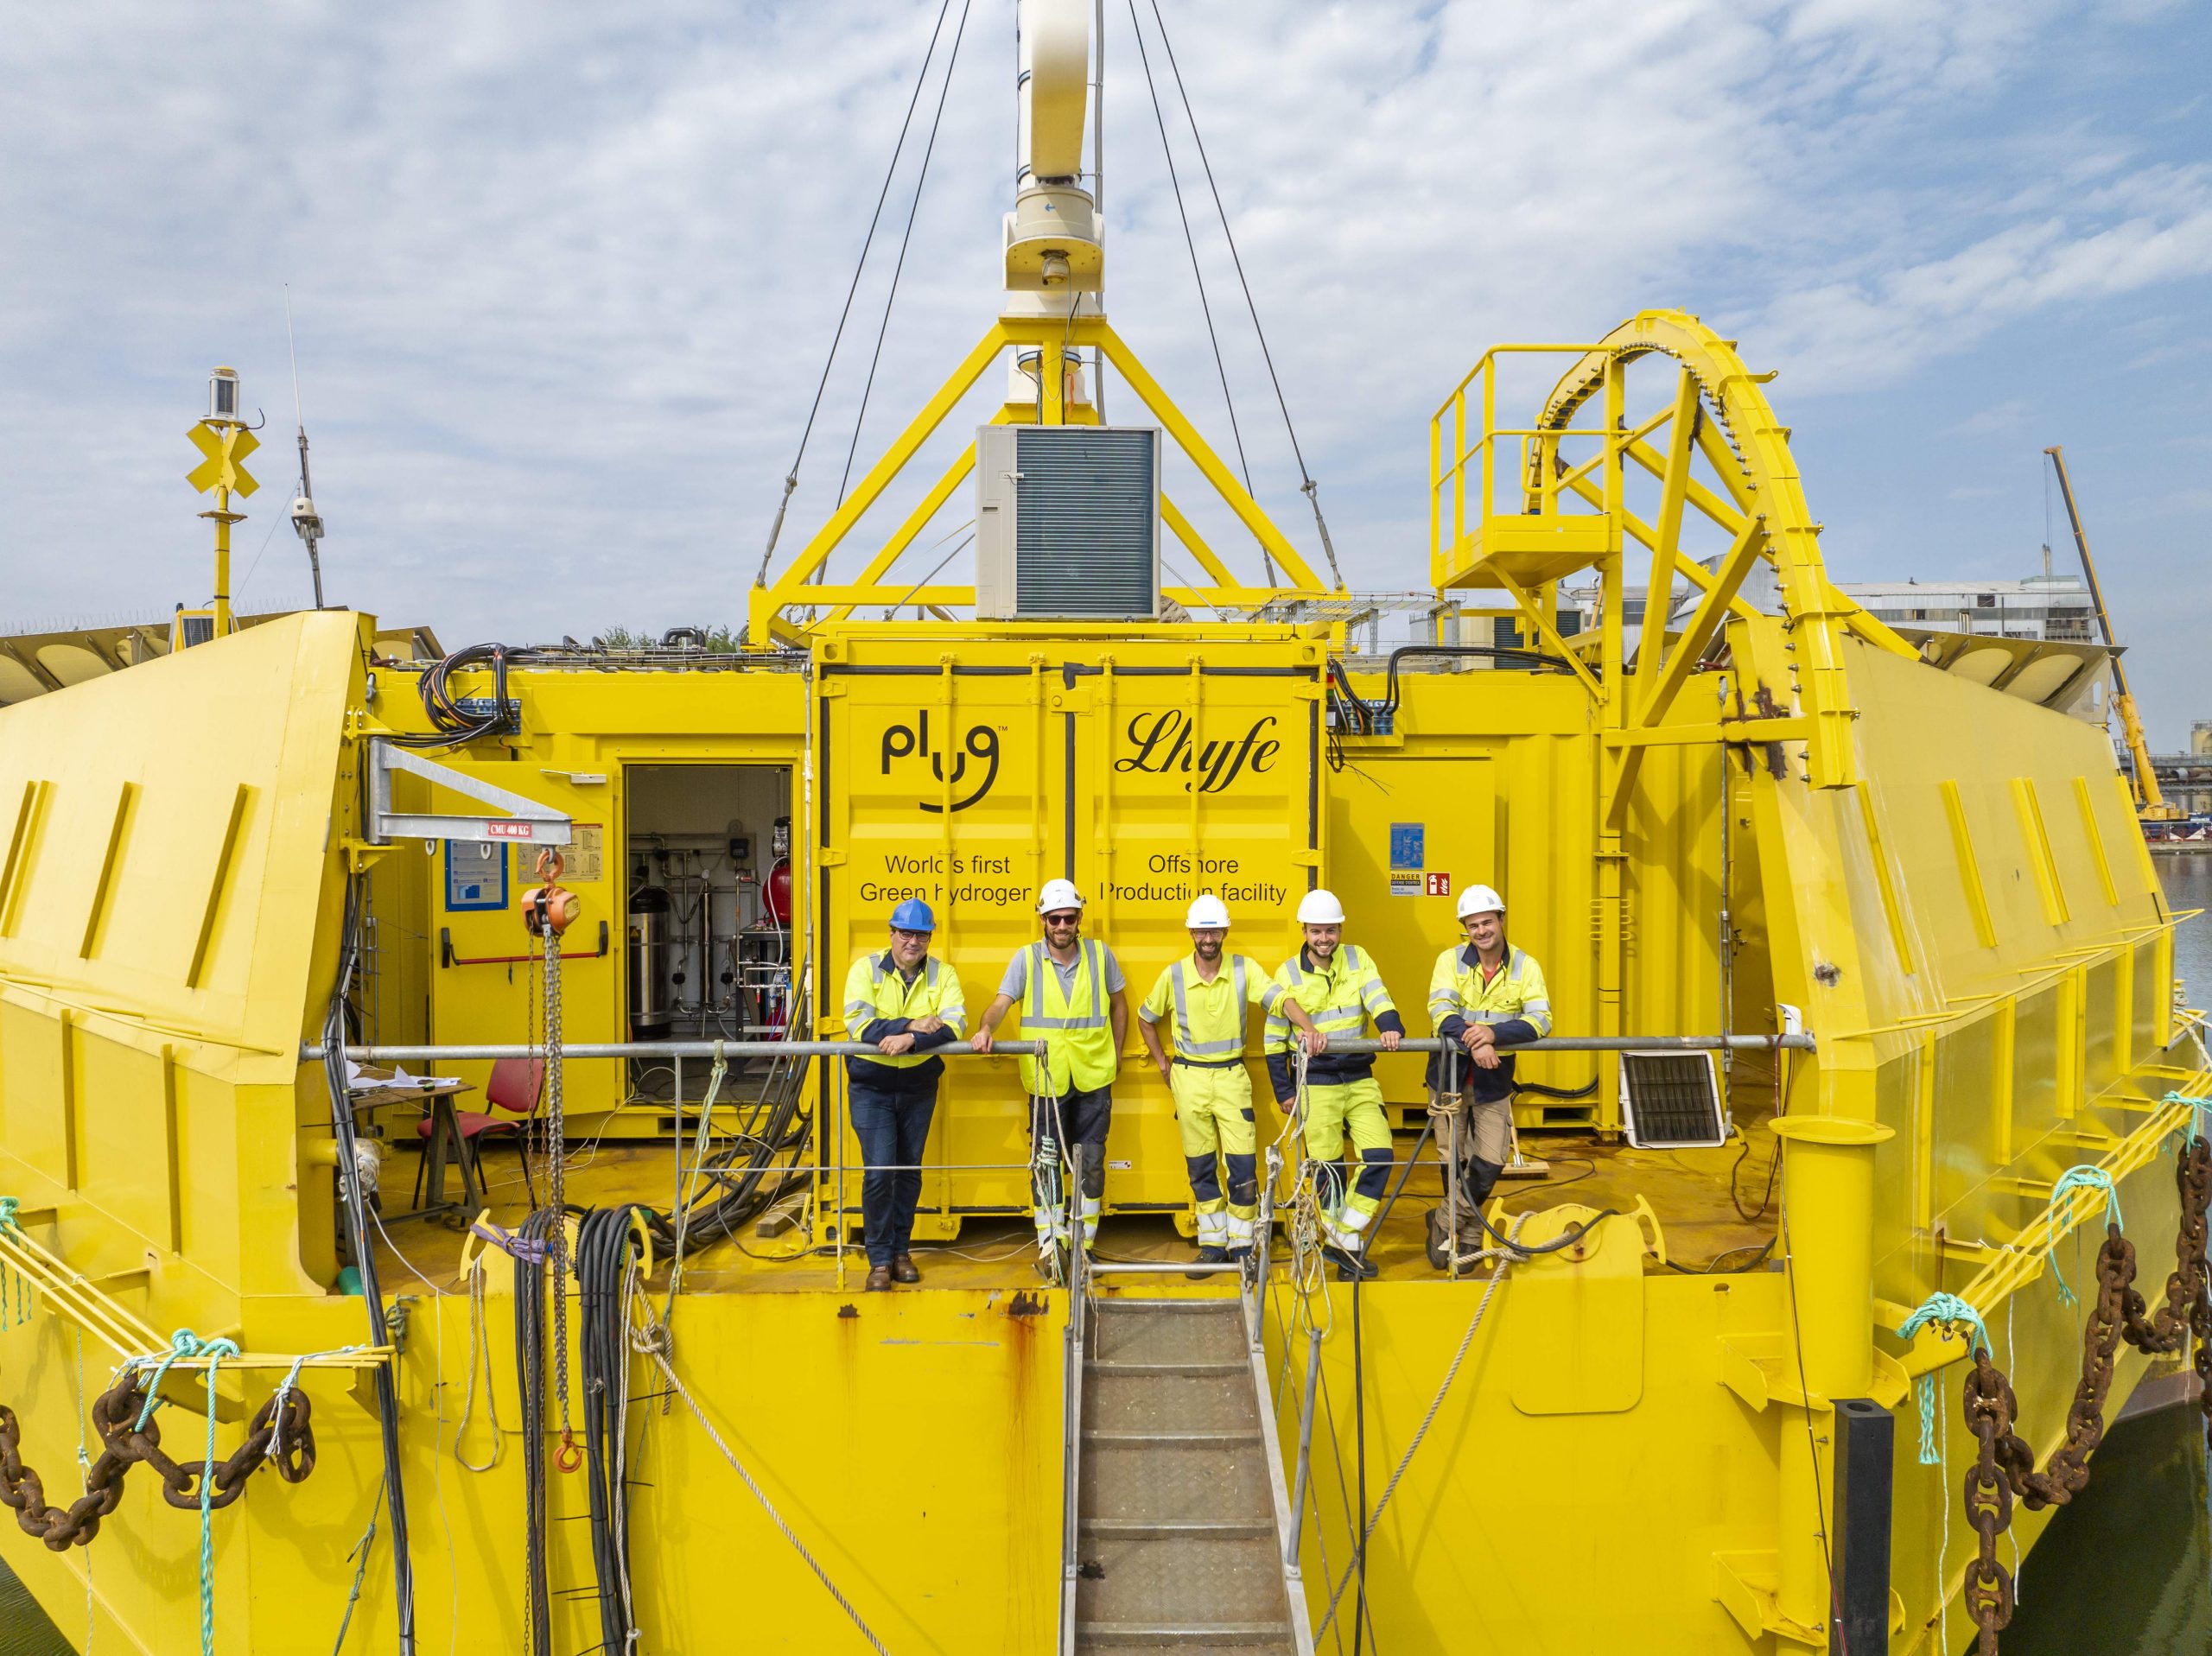 Lhyfe Launches the World’s First Offshore Renewable Green Hydrogen Site